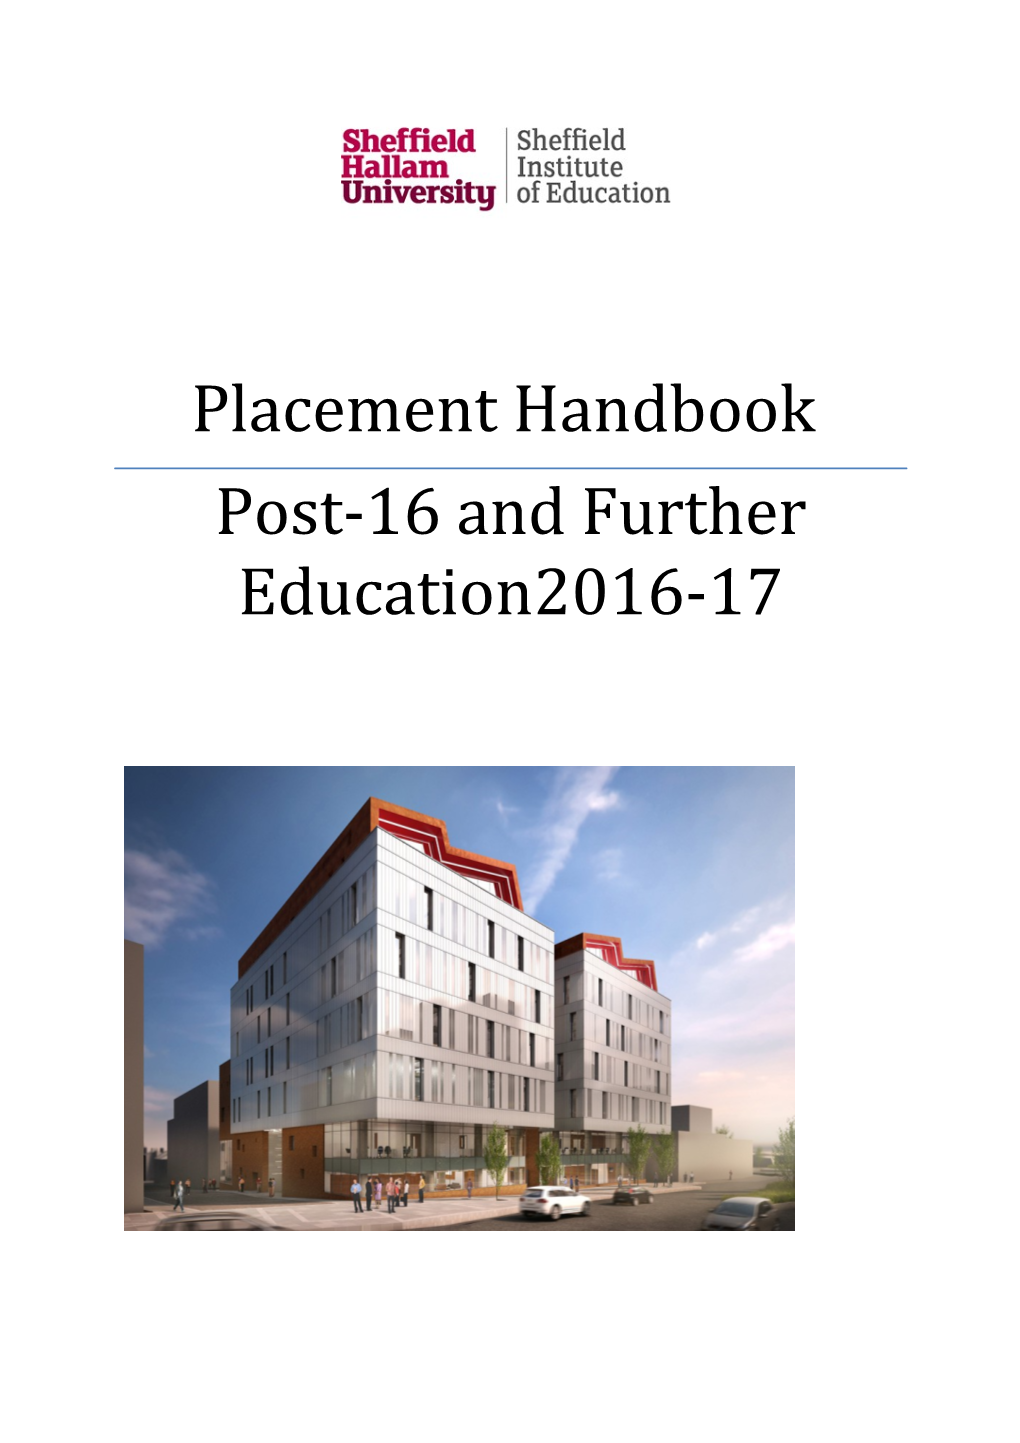 Placement Organisation and Management 2